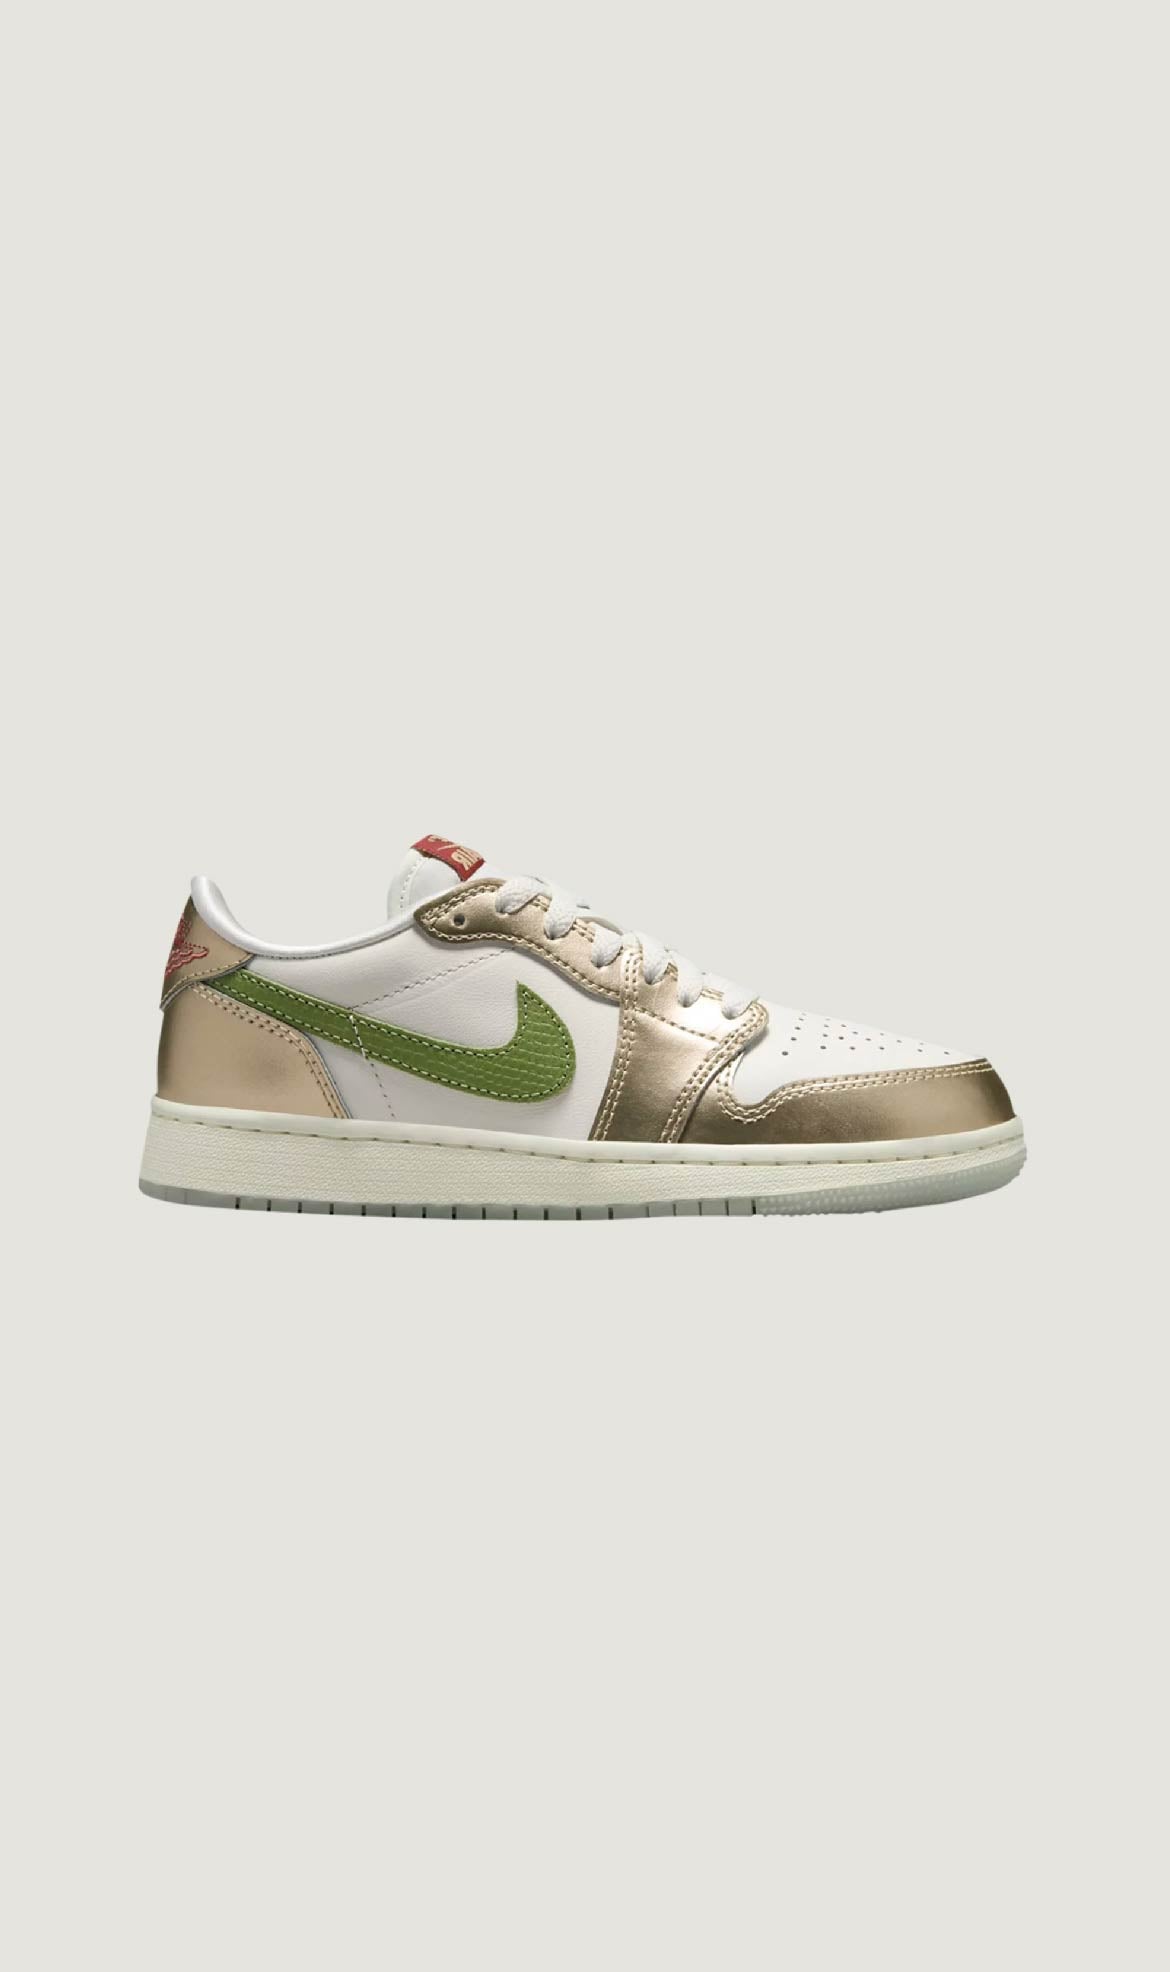 Load image into Gallery viewer, AIR JORDAN 1 RETRO LOW OG GS - YEAR OF THE DRAGON
